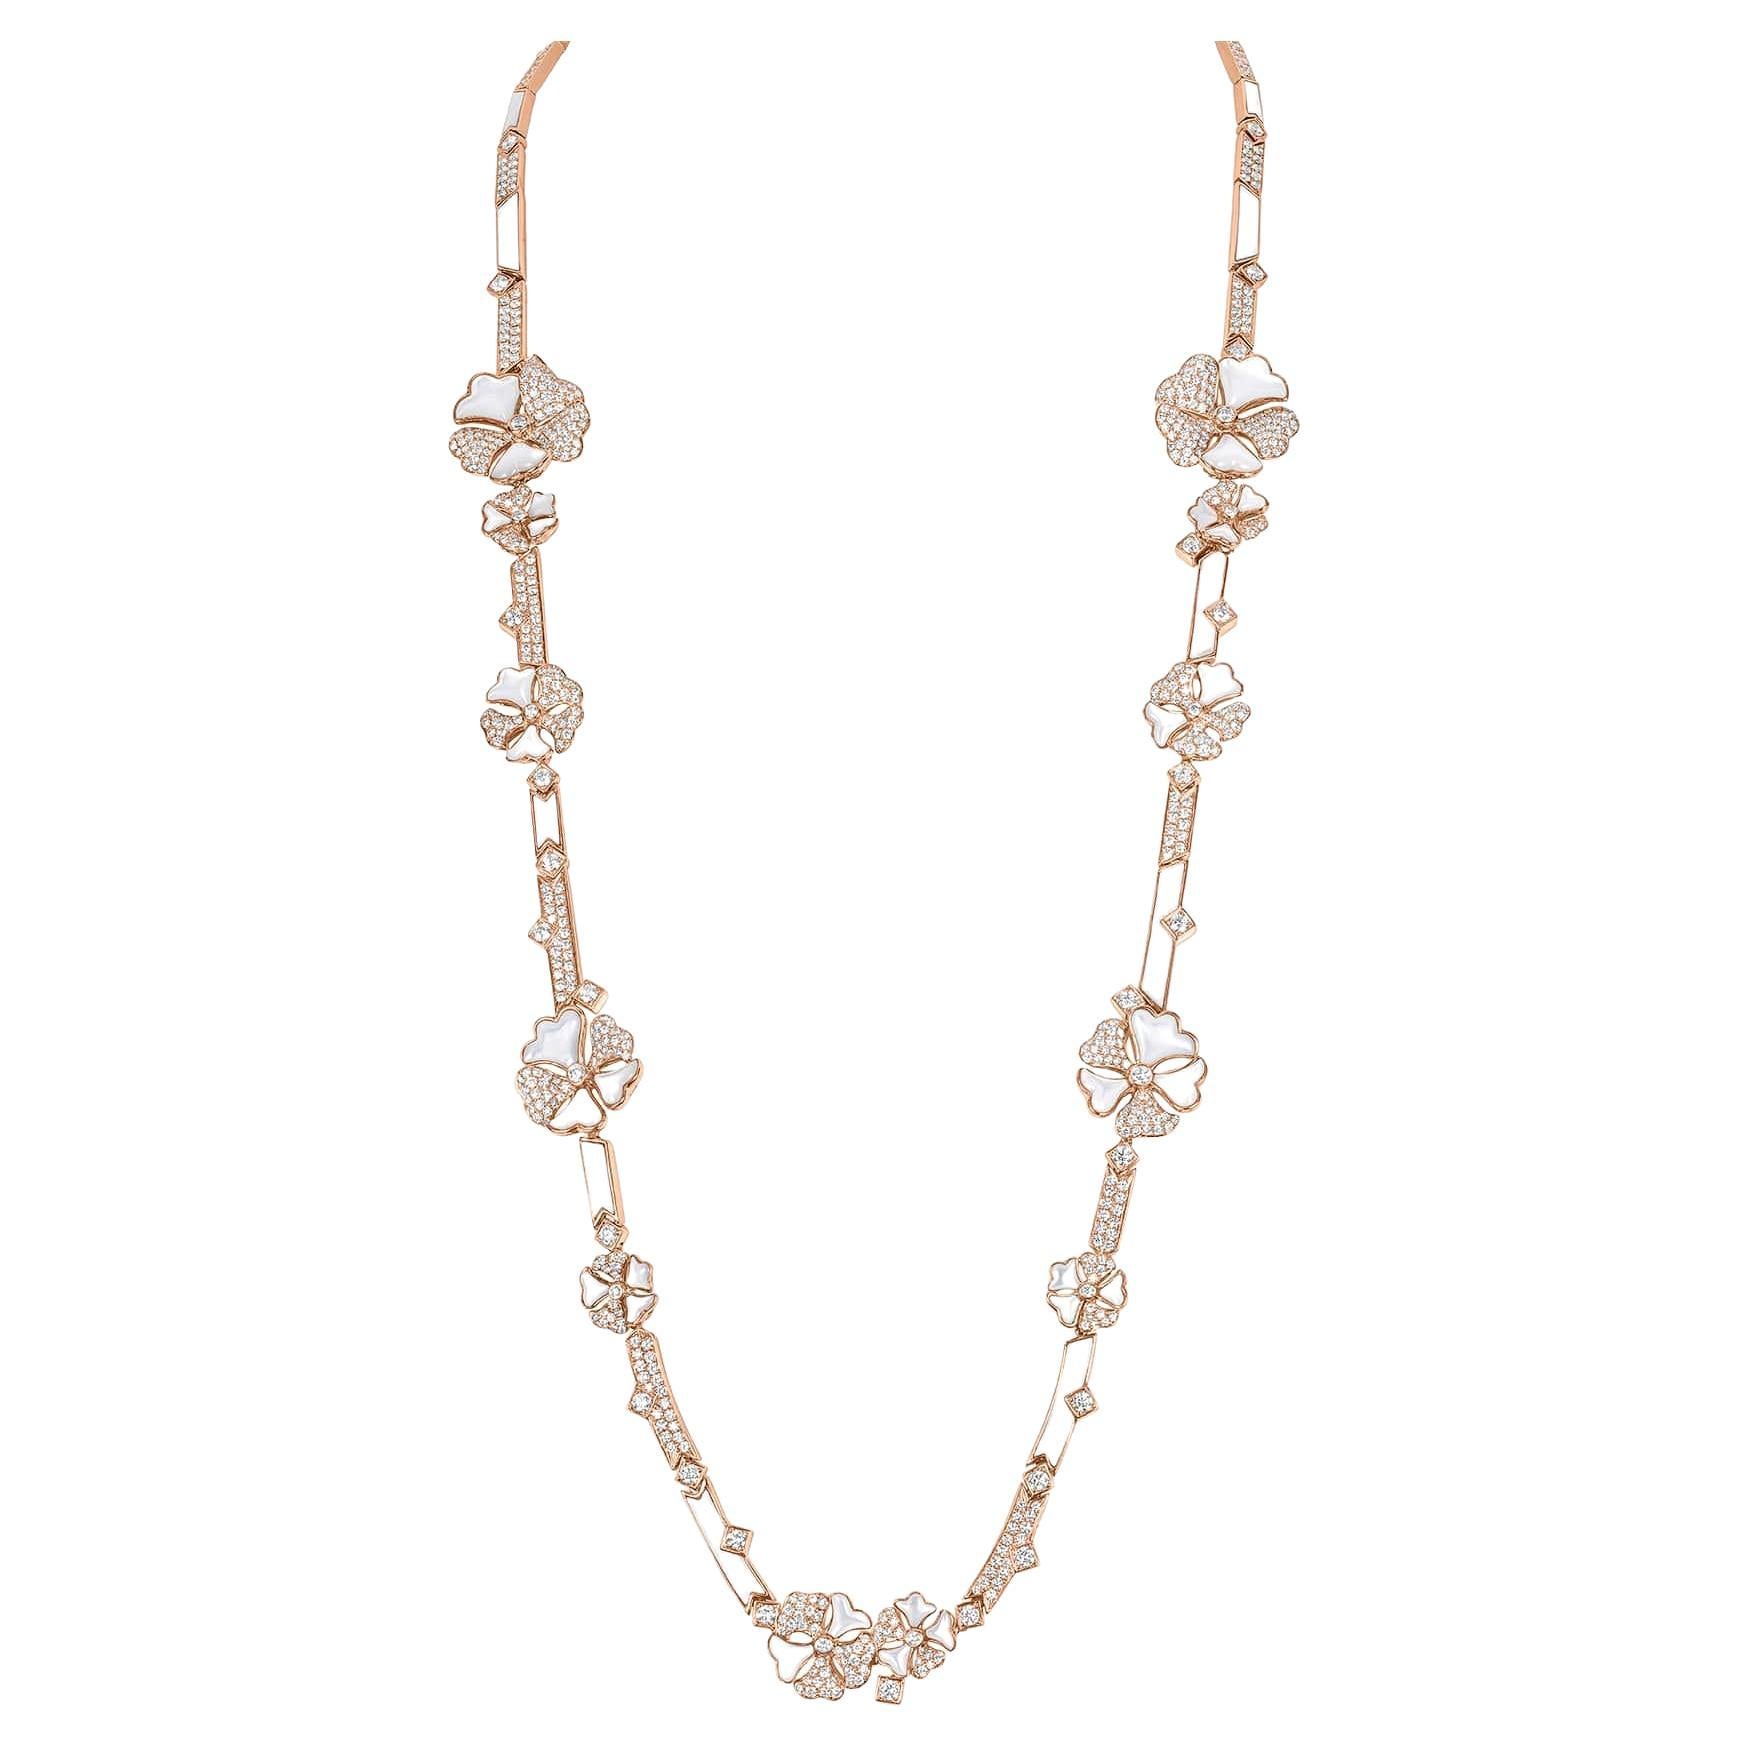 Bloom Diamond and Mother of Pearl Long Flower Chain Necklace in 18k Rose Gold